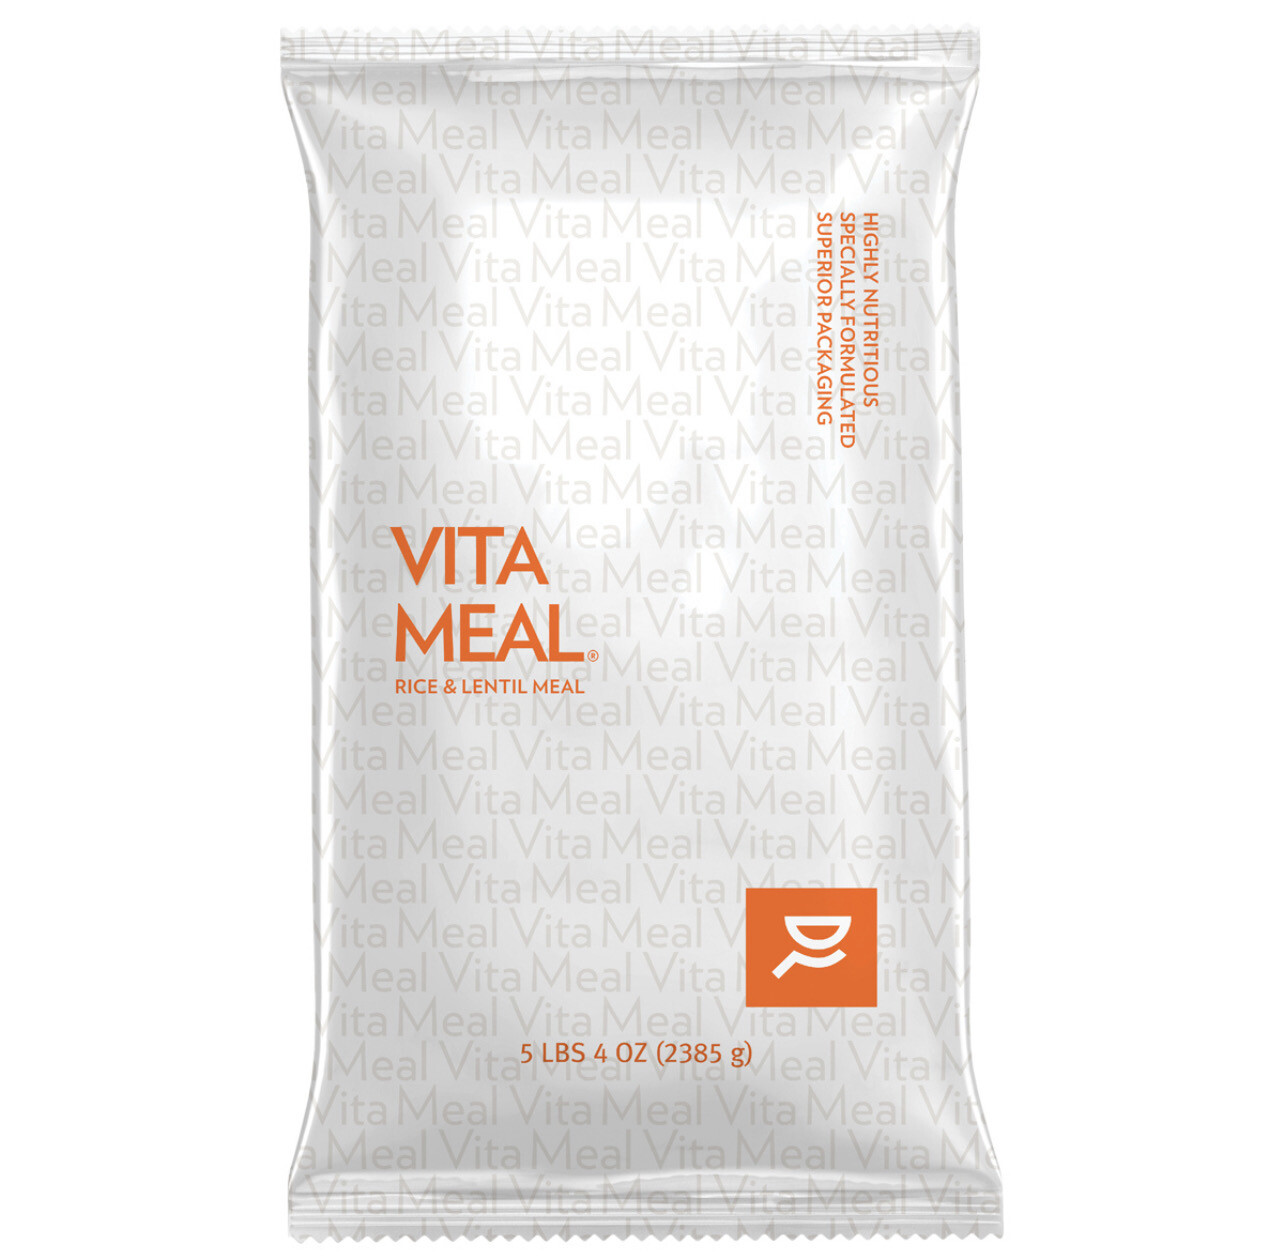 VitaMeal® Entree 5 Bags + 1 Free (purchase and donate)
$152.00 (each bag has 30 child-sized meals)